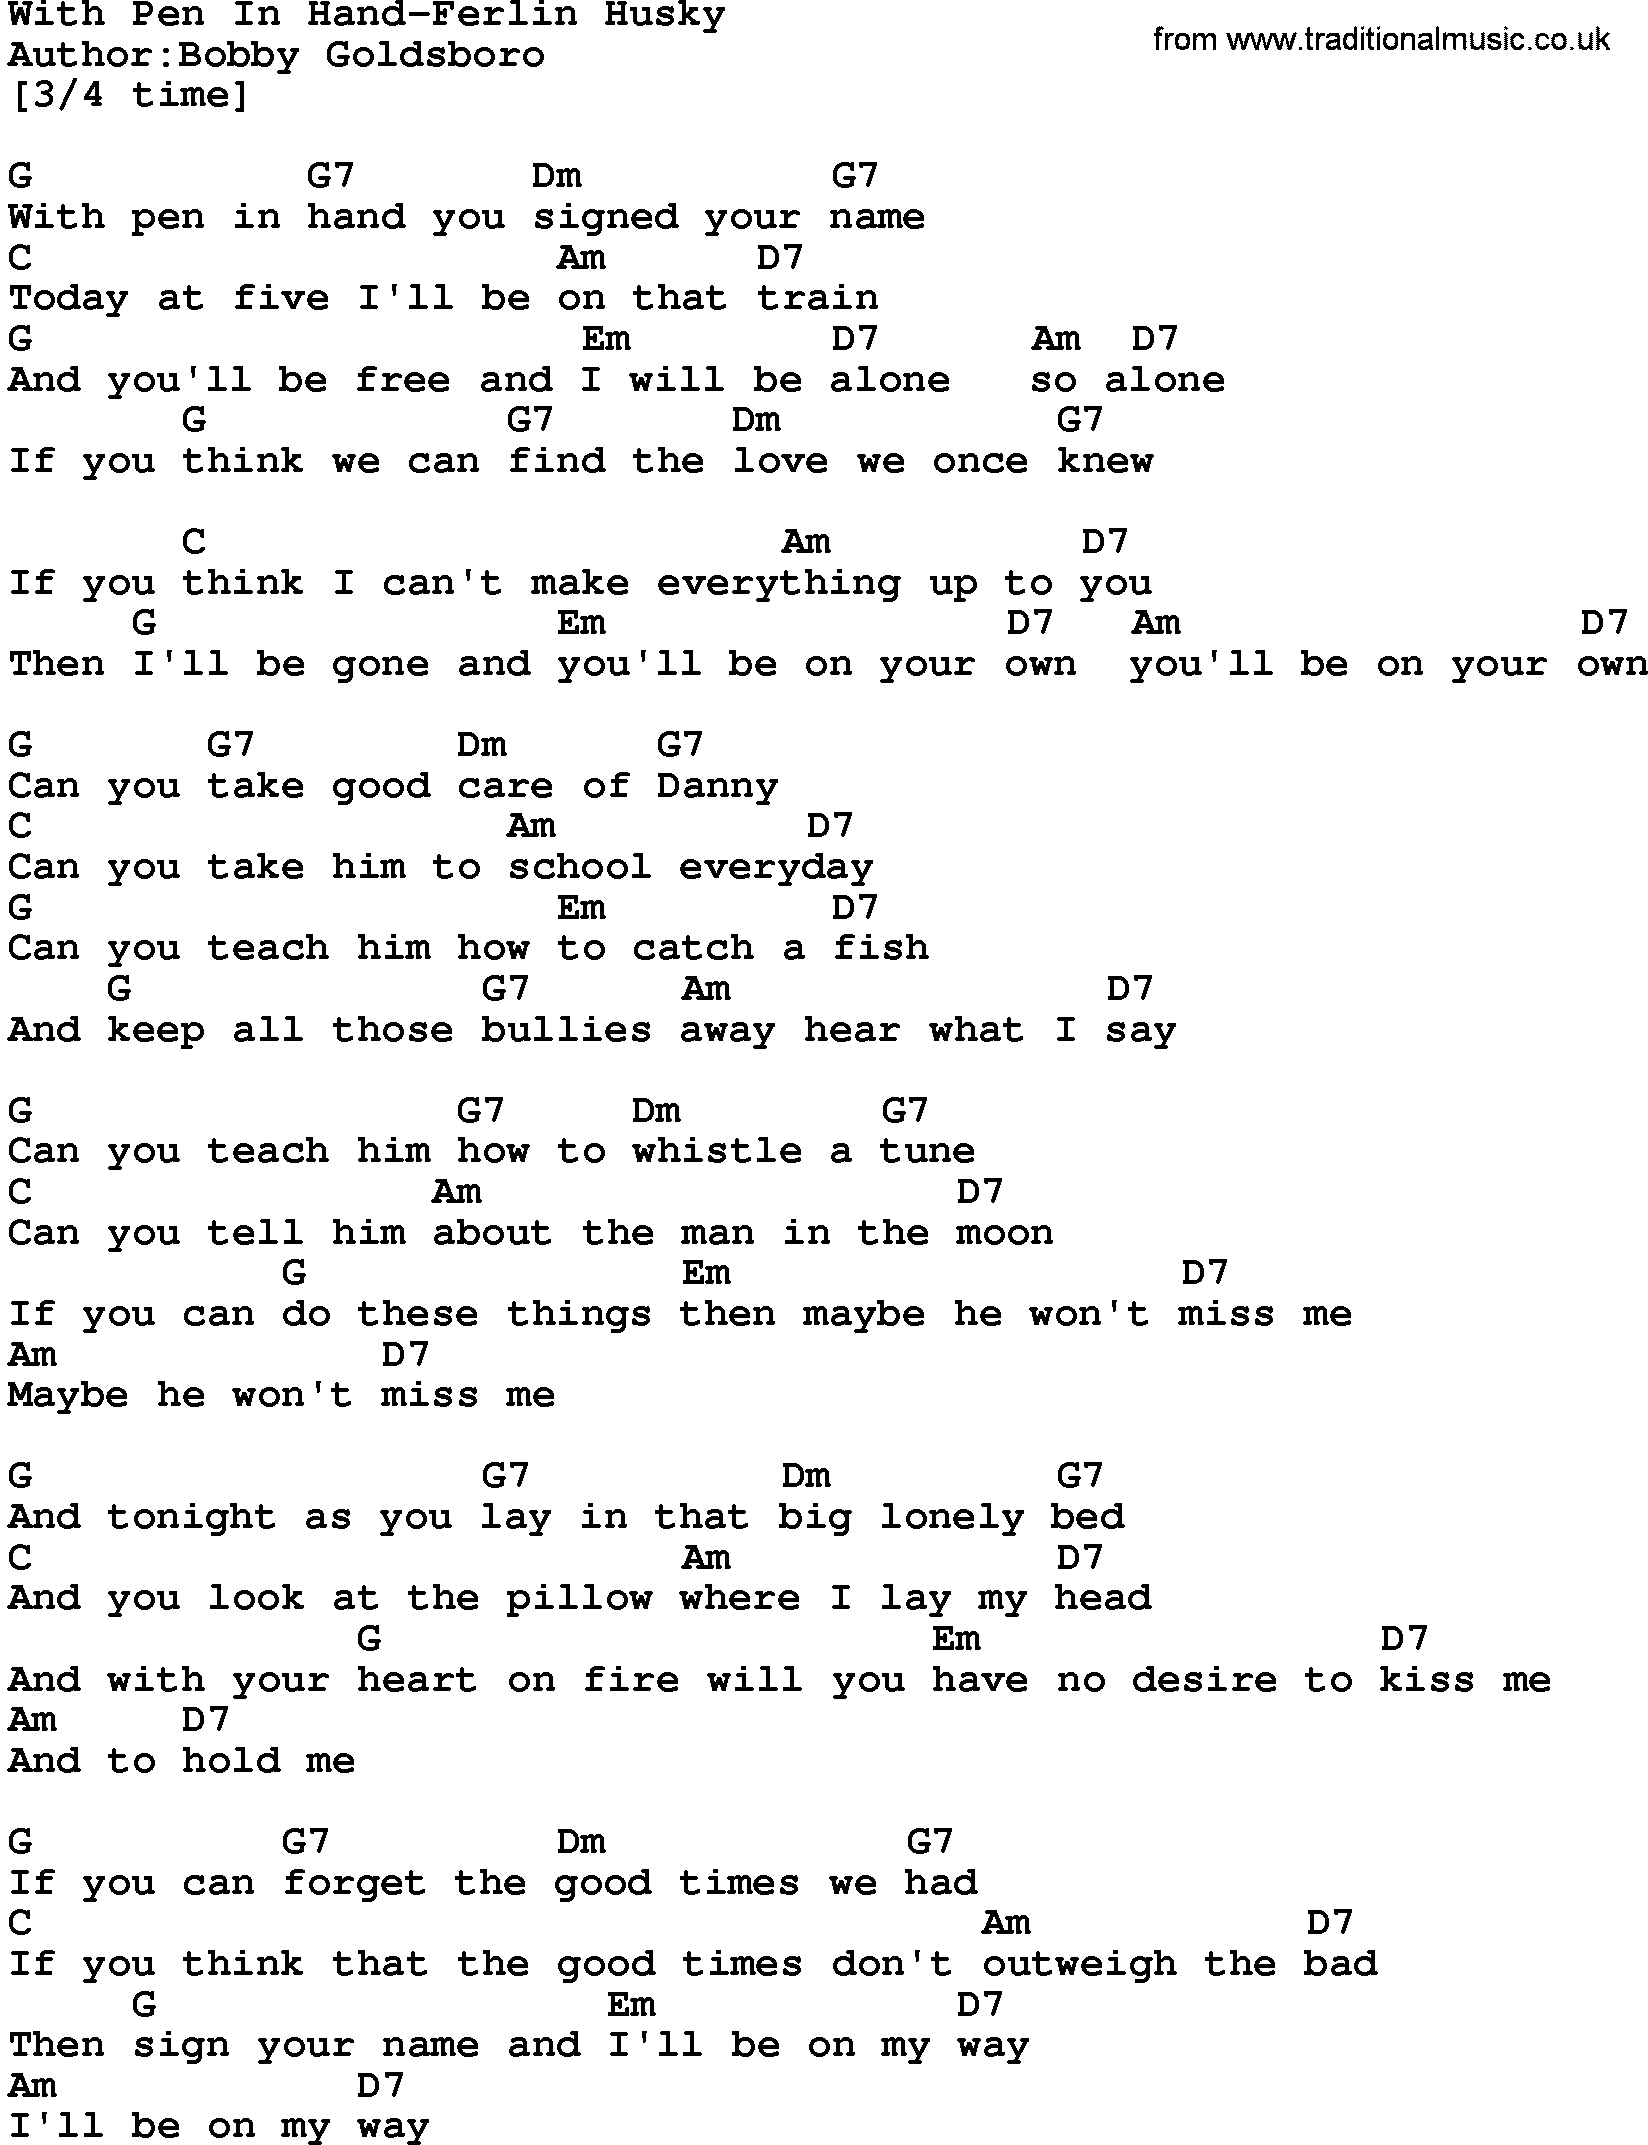 Country music song: With Pen In Hand-Ferlin Husky lyrics and chords